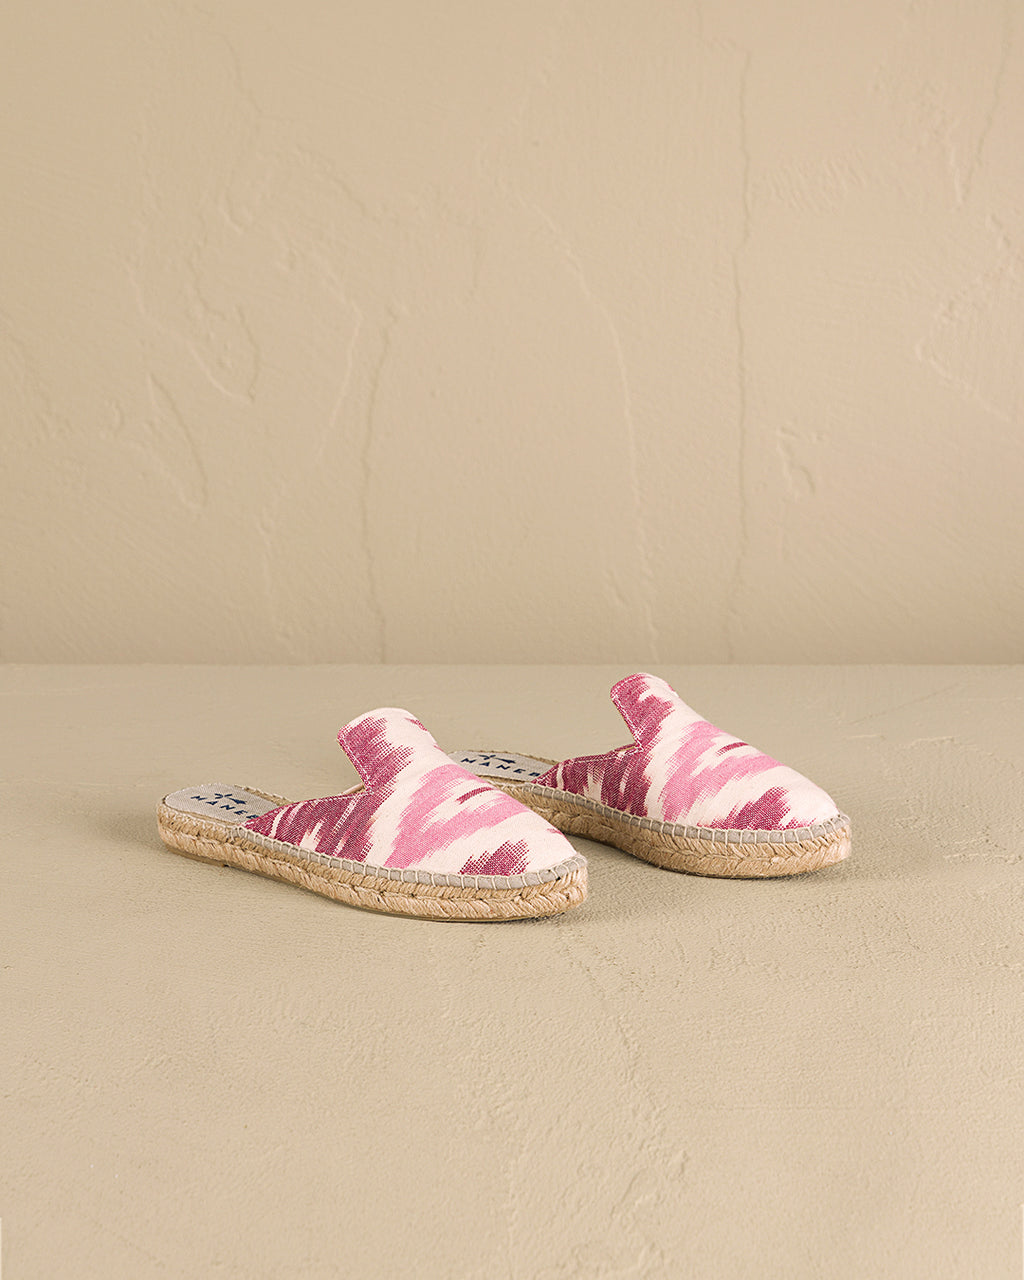 Dyed Cotton Mules - Tulum Pink And White Ikat